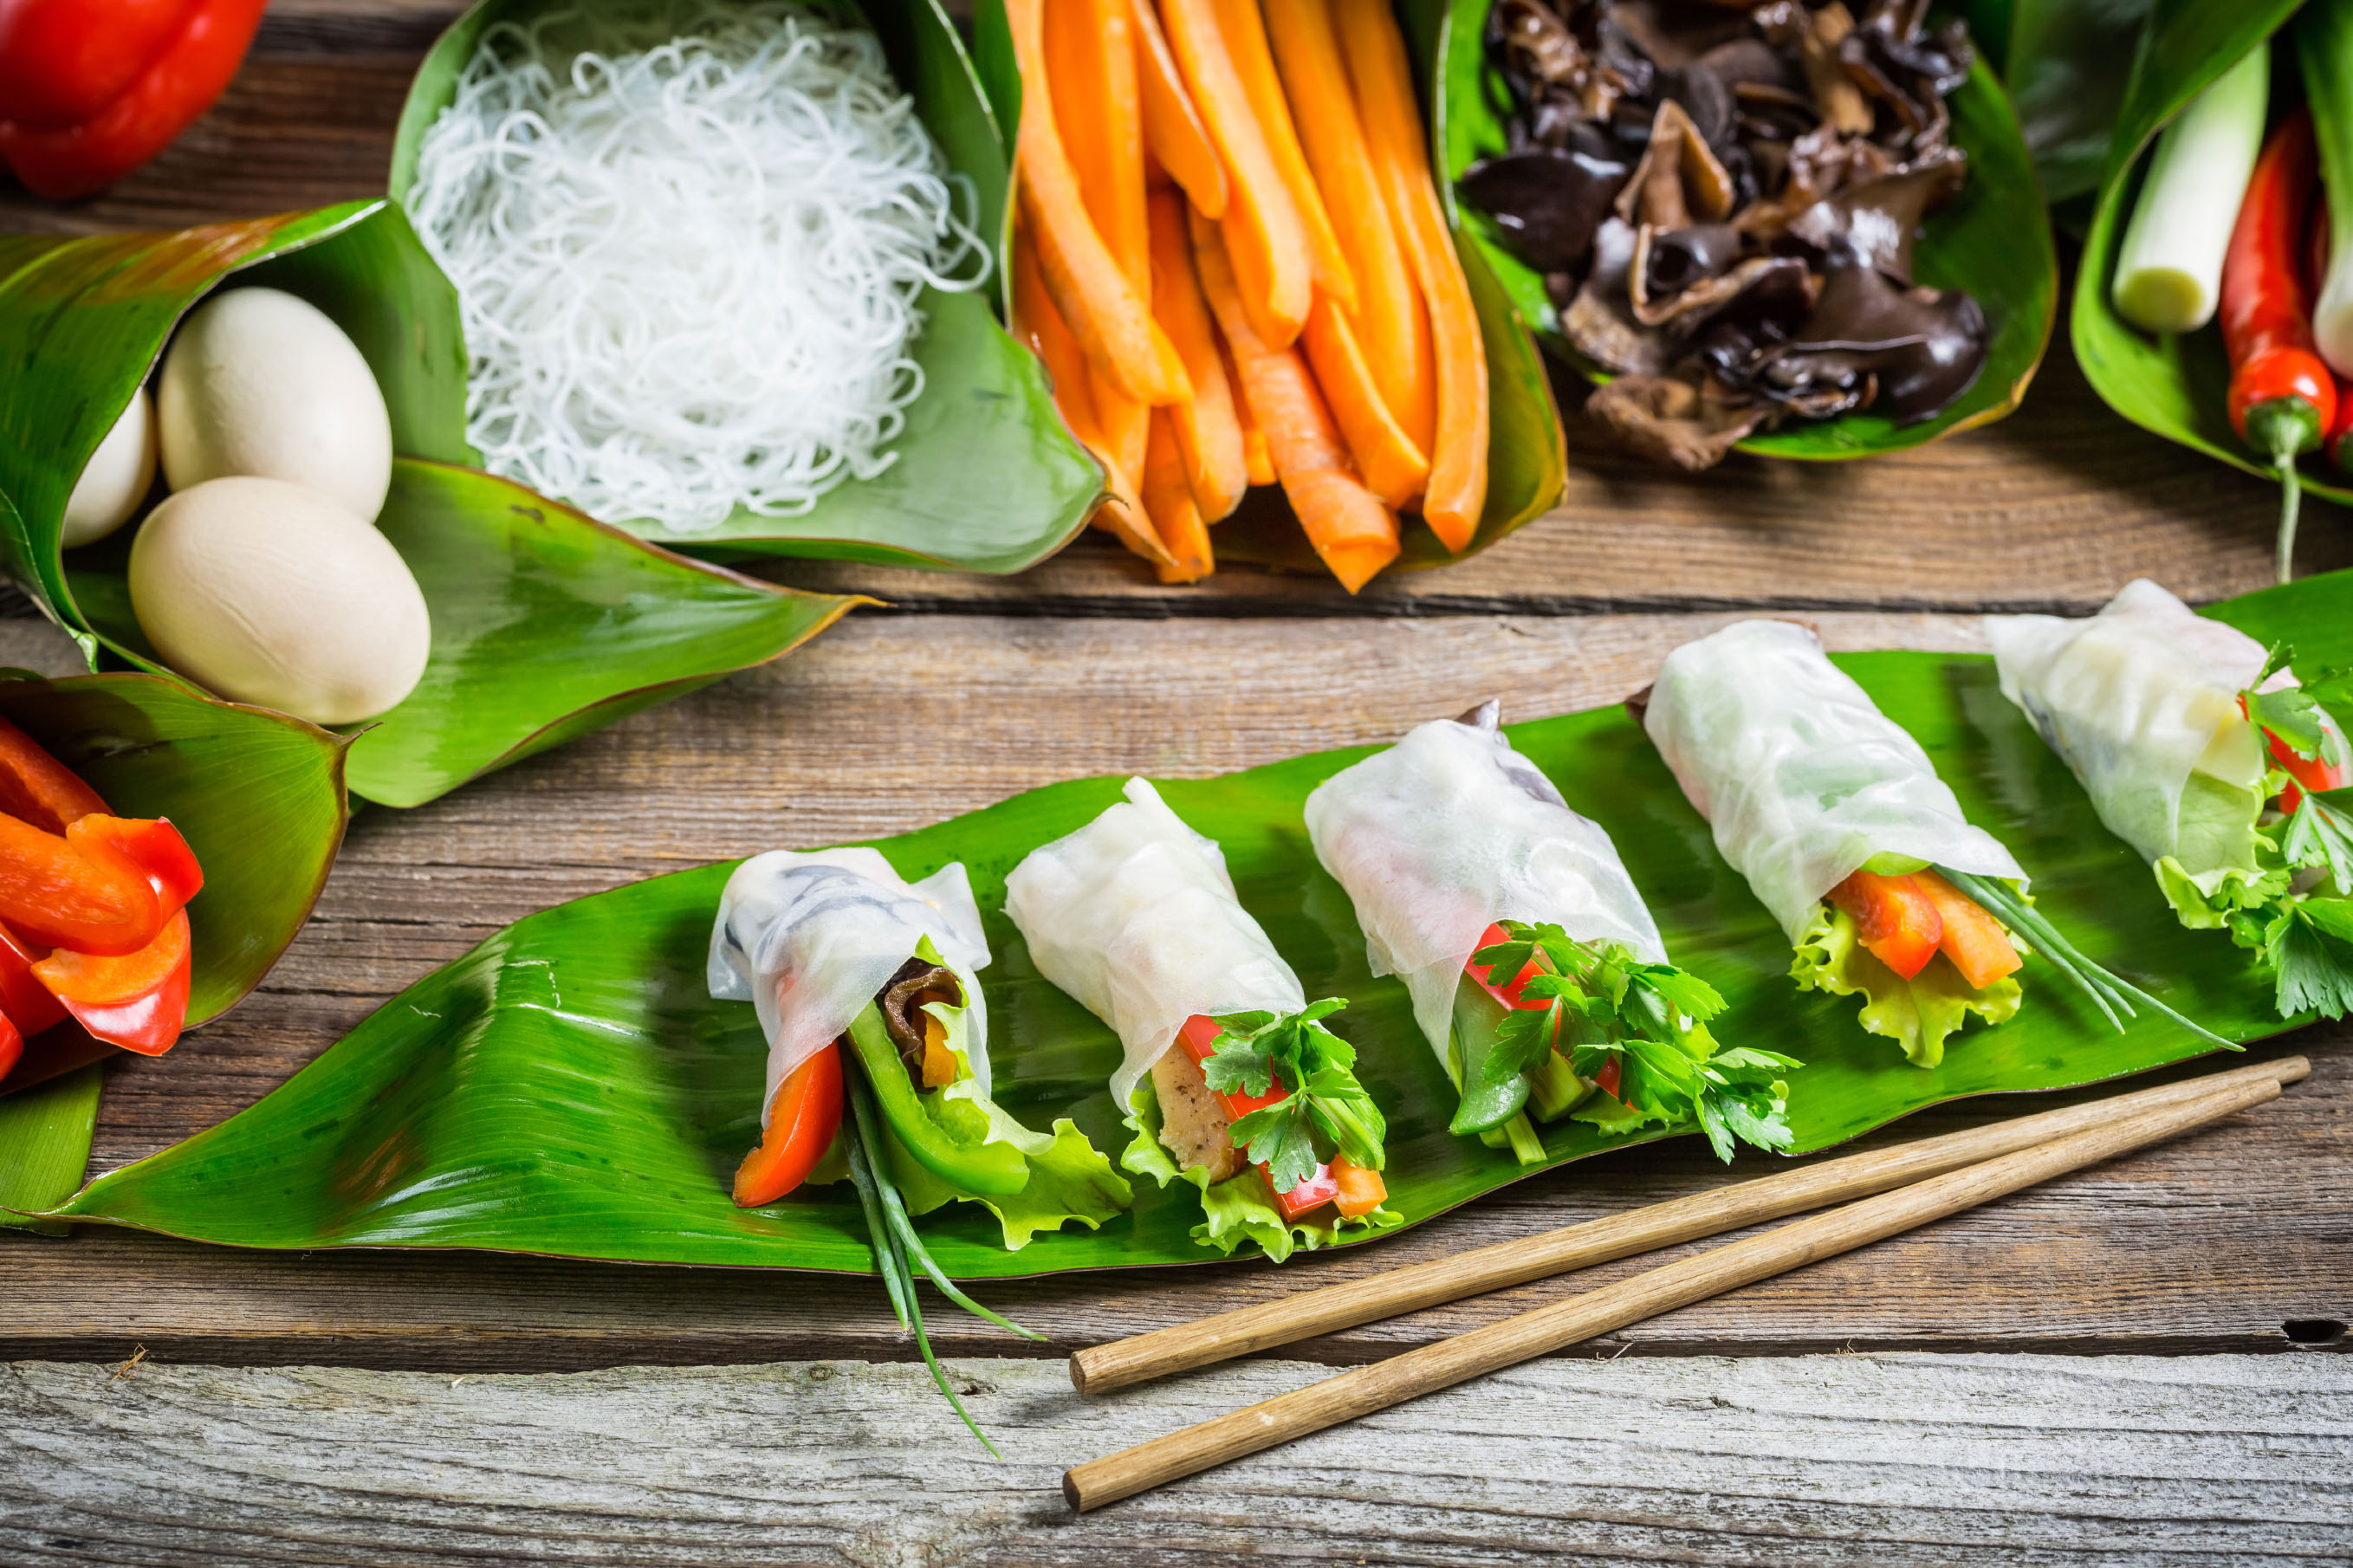 Spring rolls with vegetables and chicken